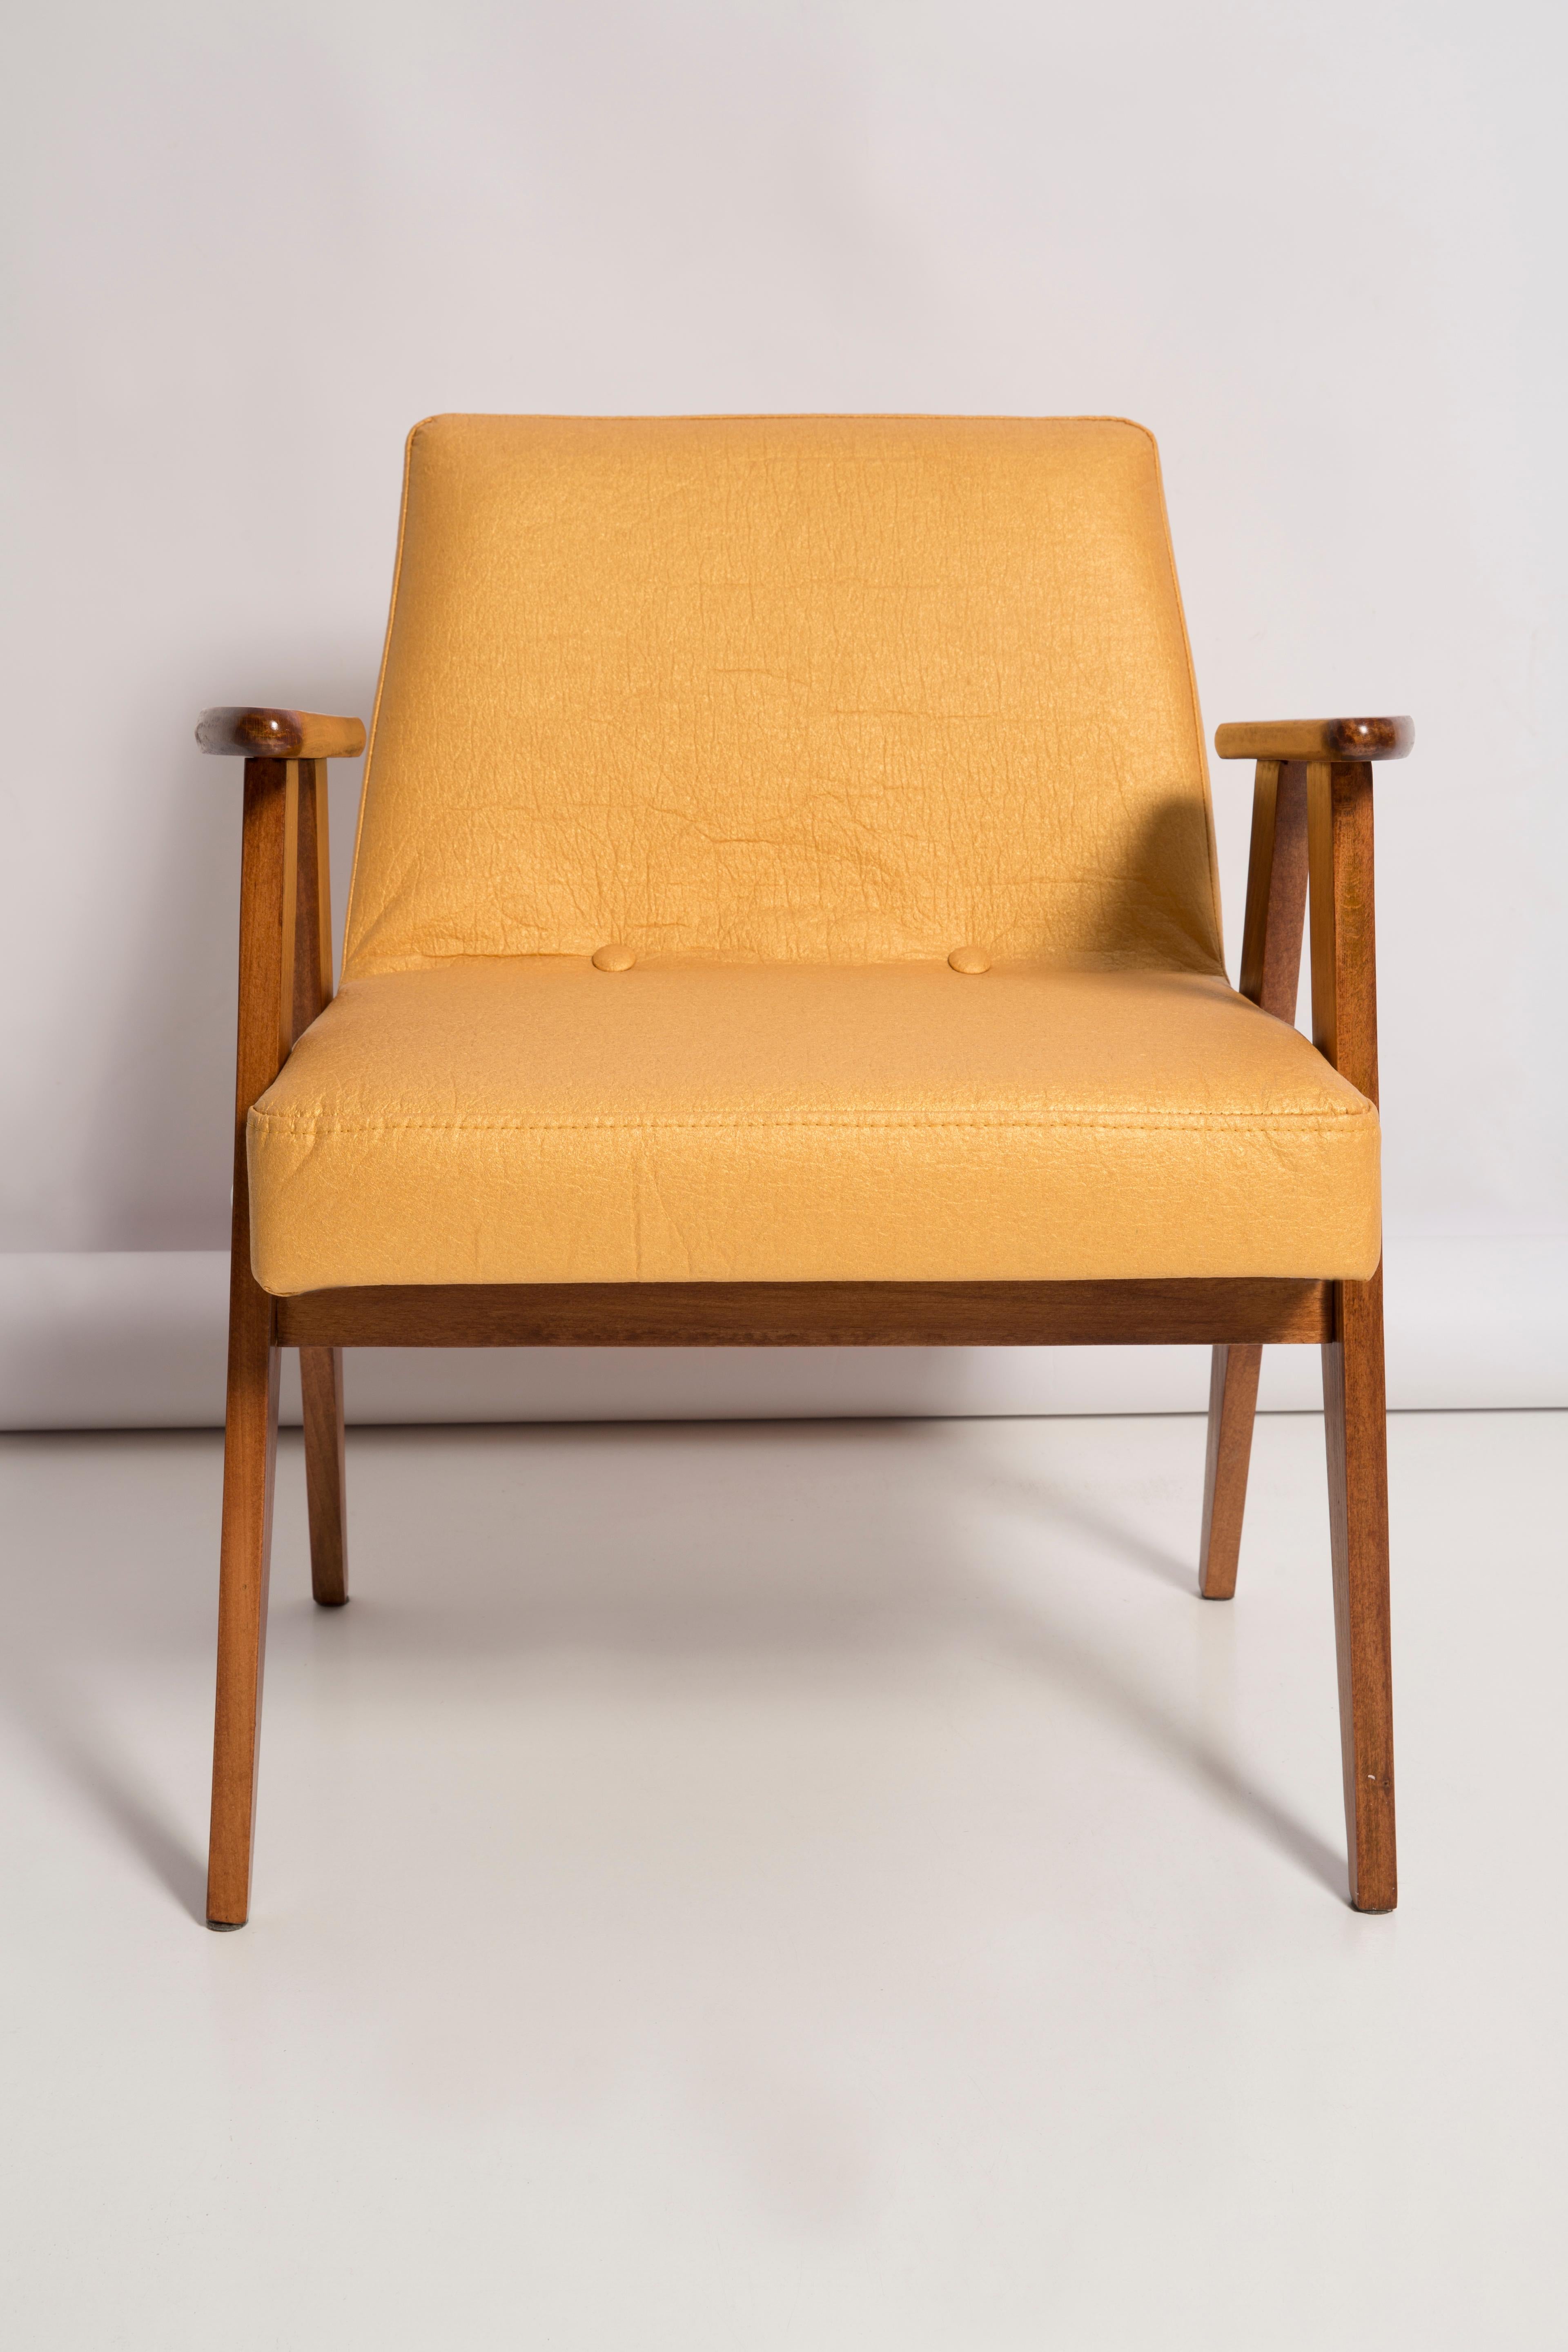 Midcentury 366 Club Armchair in Gold Pineapple Leather, Jozef Chierowski, 1960s For Sale 5